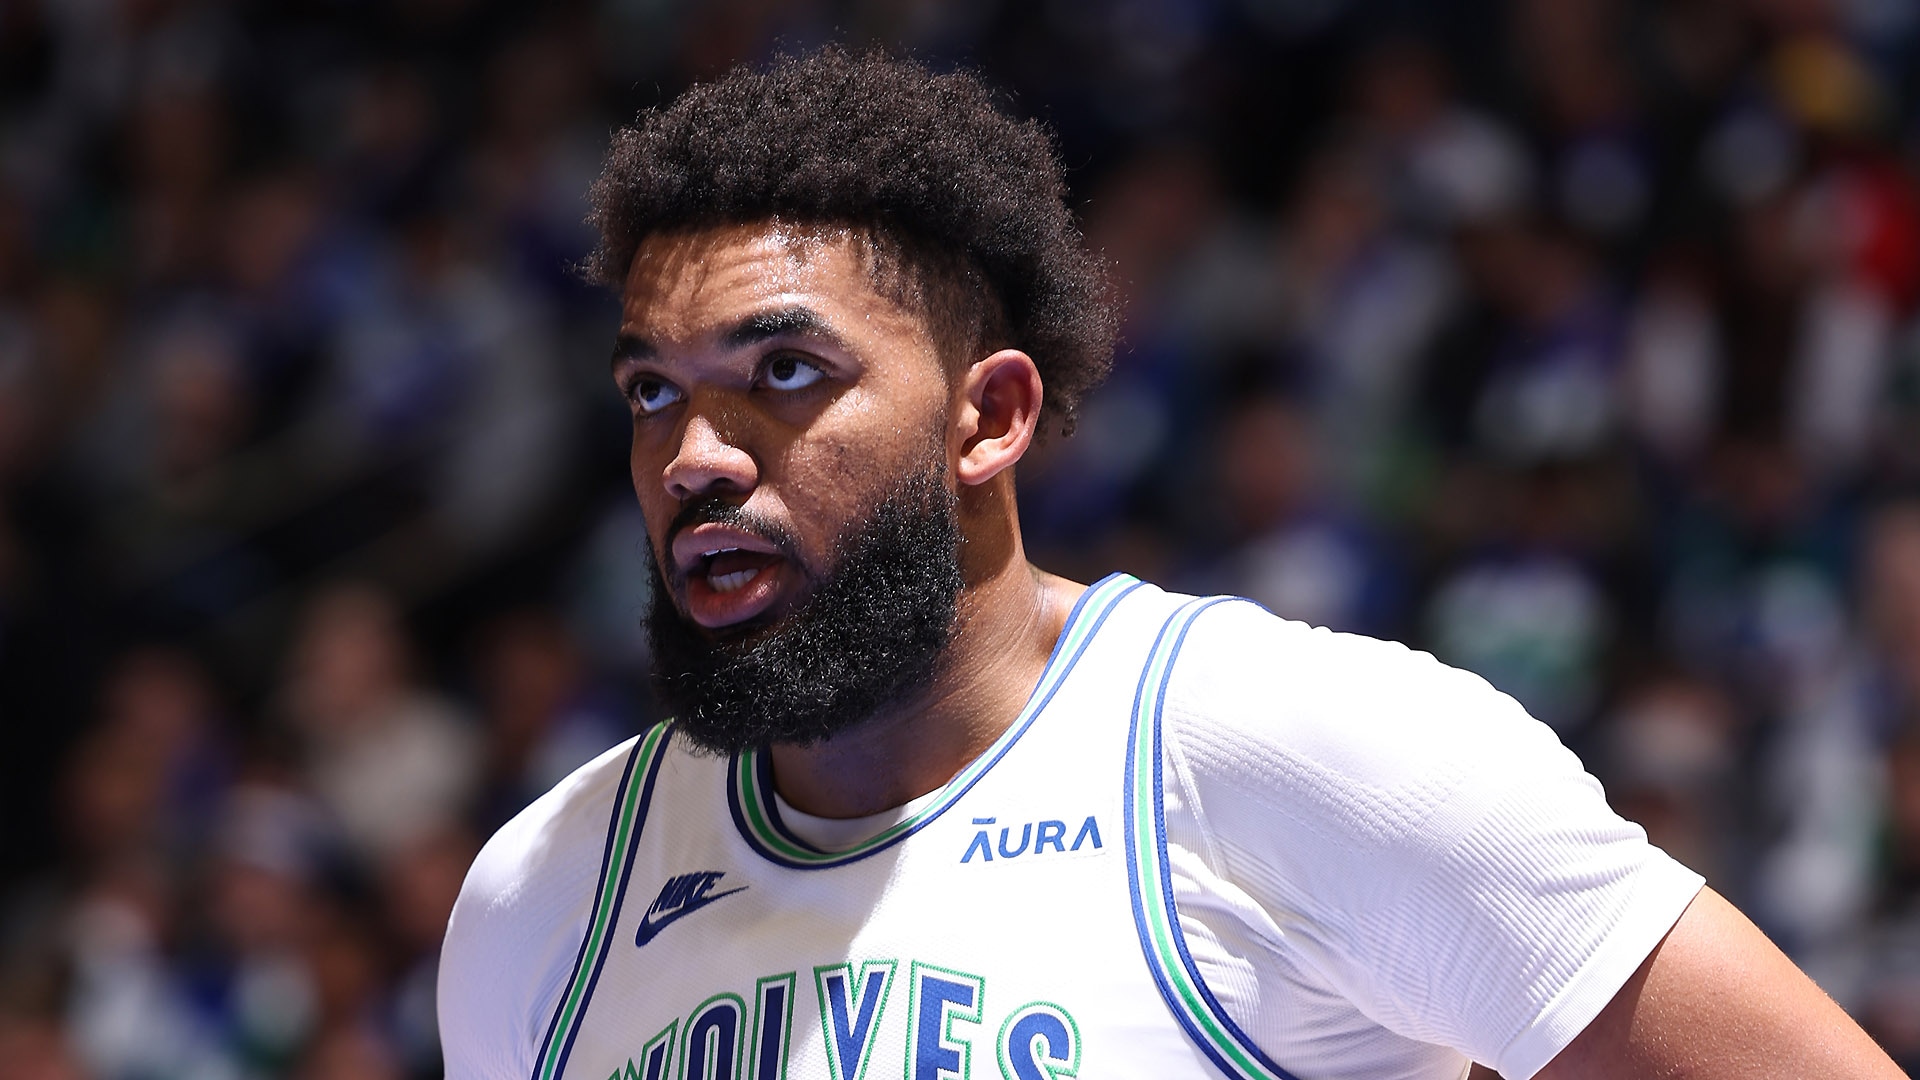 Karl-Anthony Towns (torn meniscus) to have surgery, out at least 1 month